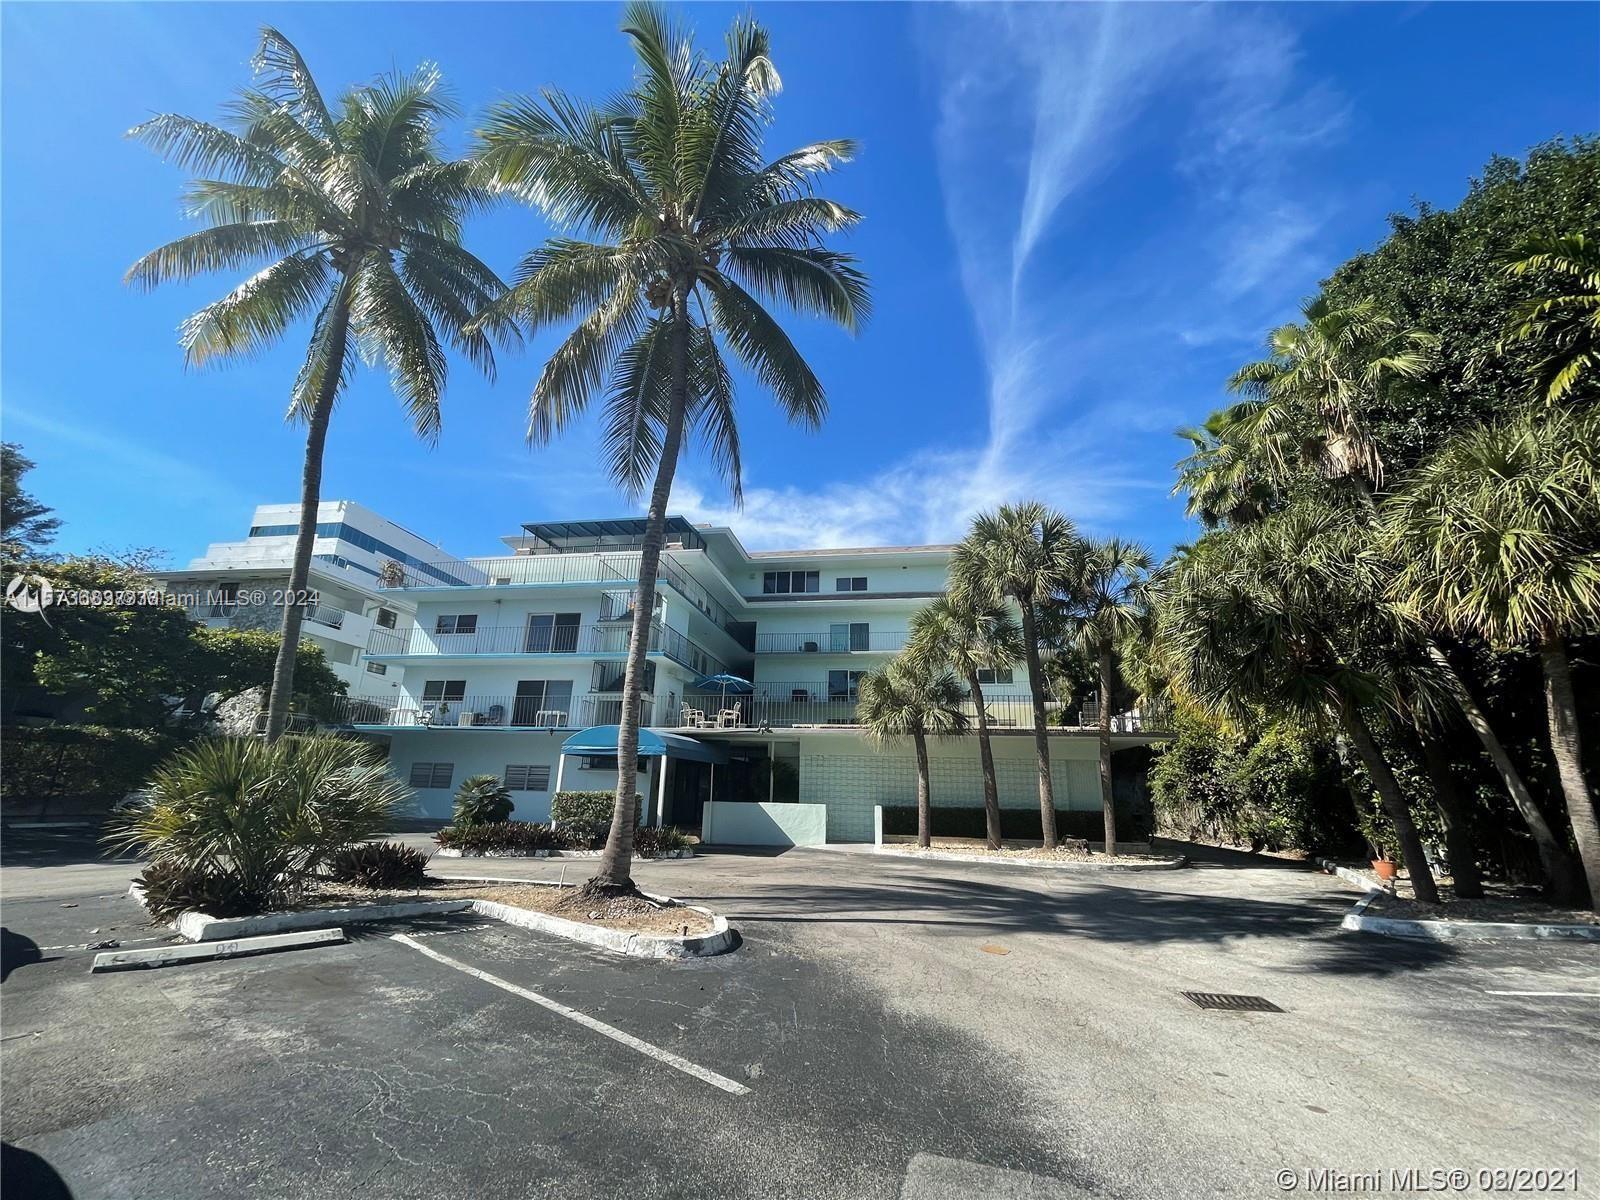 Charming 1 bedroom, 1 bathroom 585 SF condo is on the 2nd floor with a washer/dryer in the unit. Harbour Hill is located in Coconut Grove across the street from Monty's restaurant, David Kennedy Park, the marinas, shopping, and much more!  $75 application fee and $200 refundable deposit to Association.